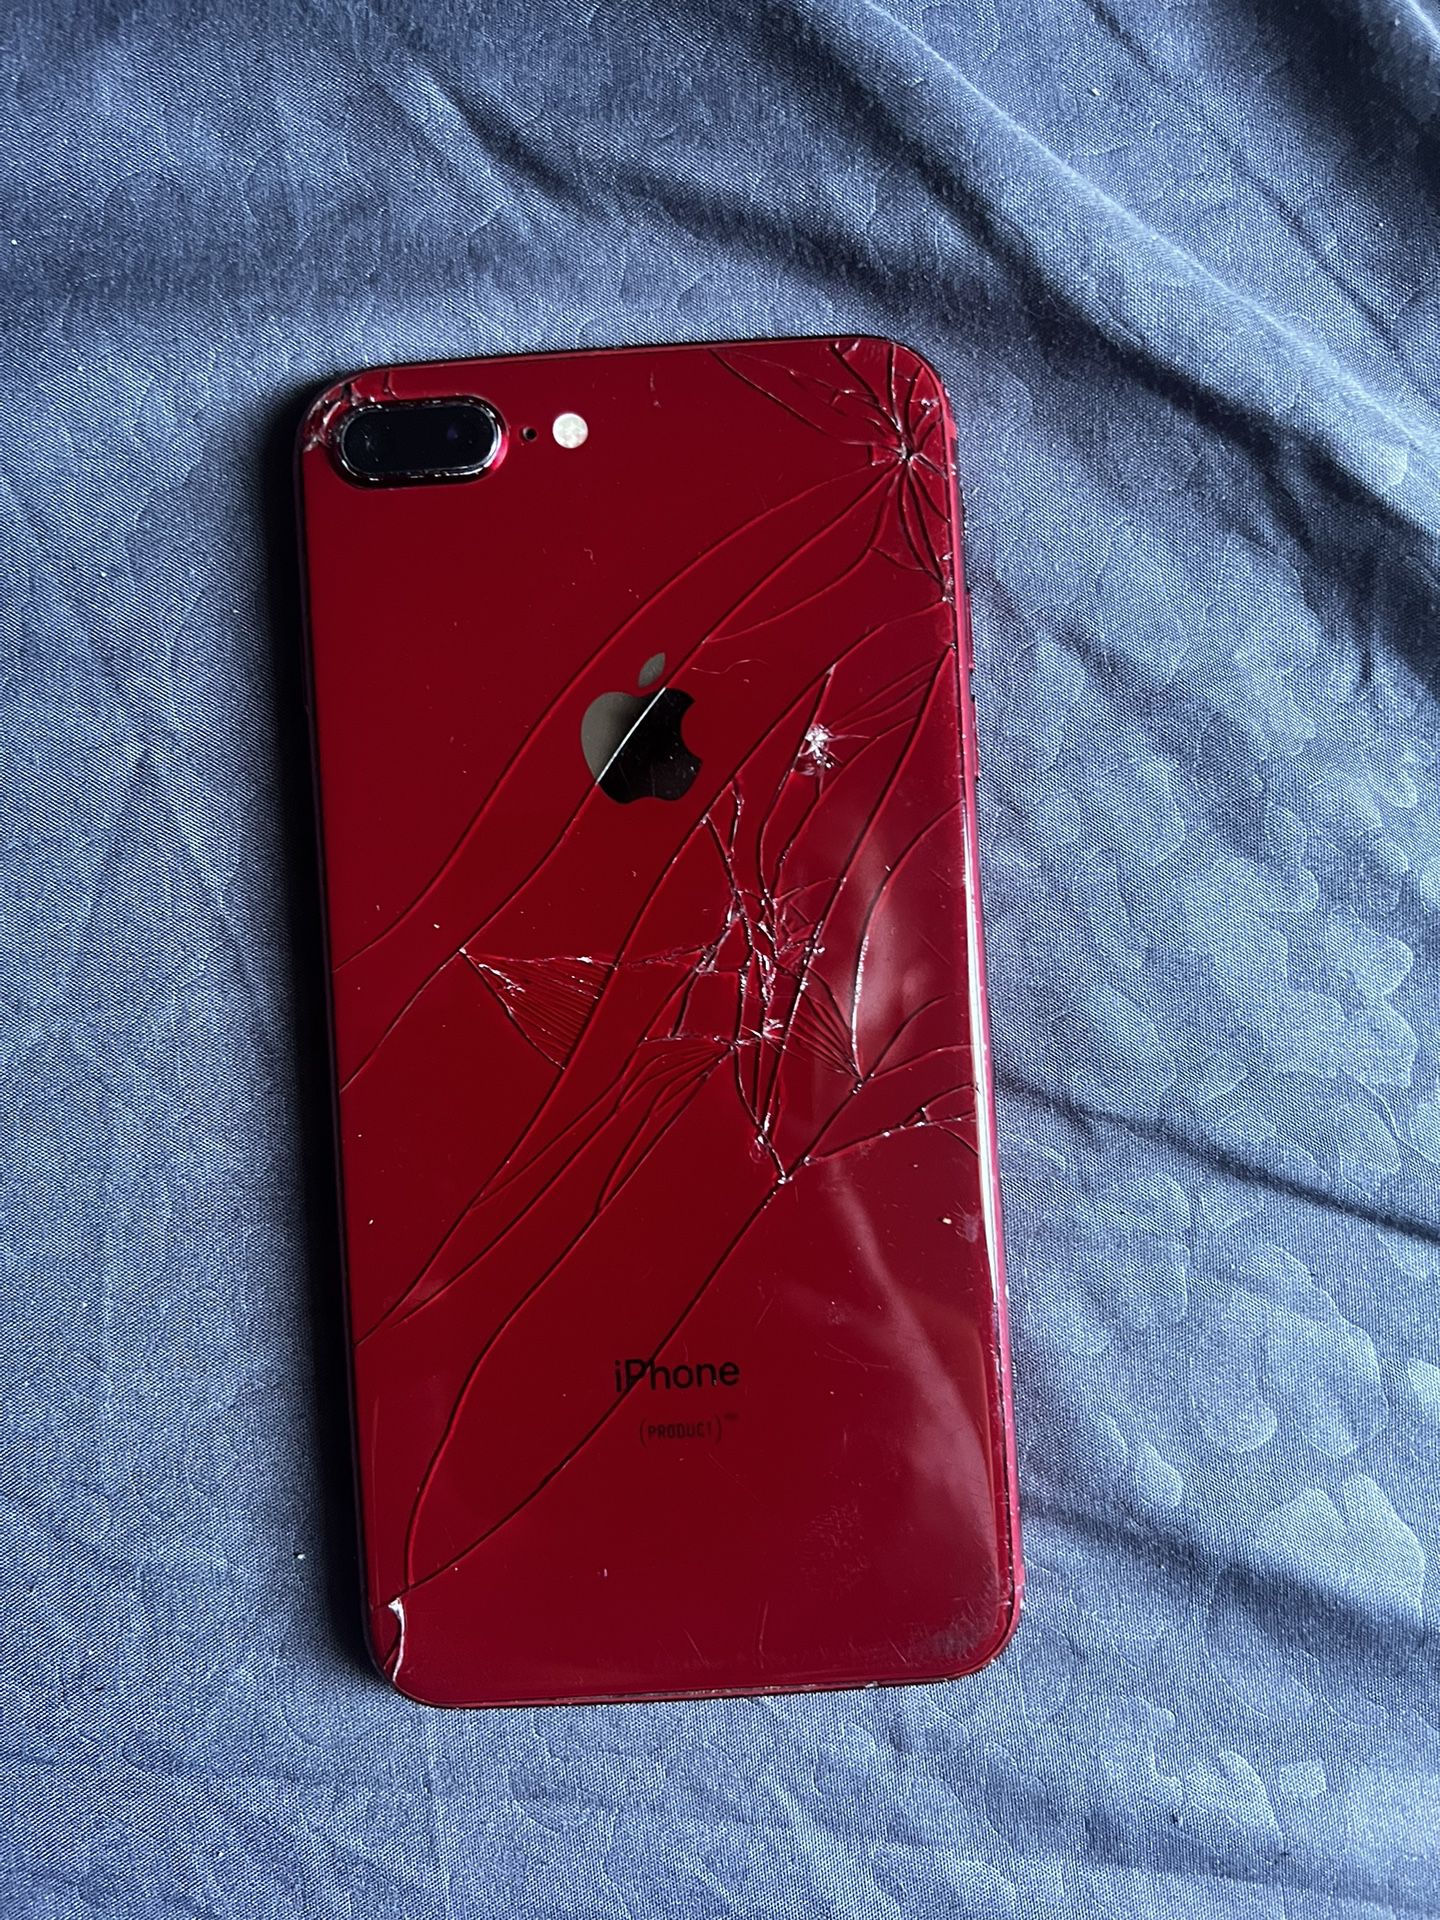 iPhone 8 Plus Product Red Edition